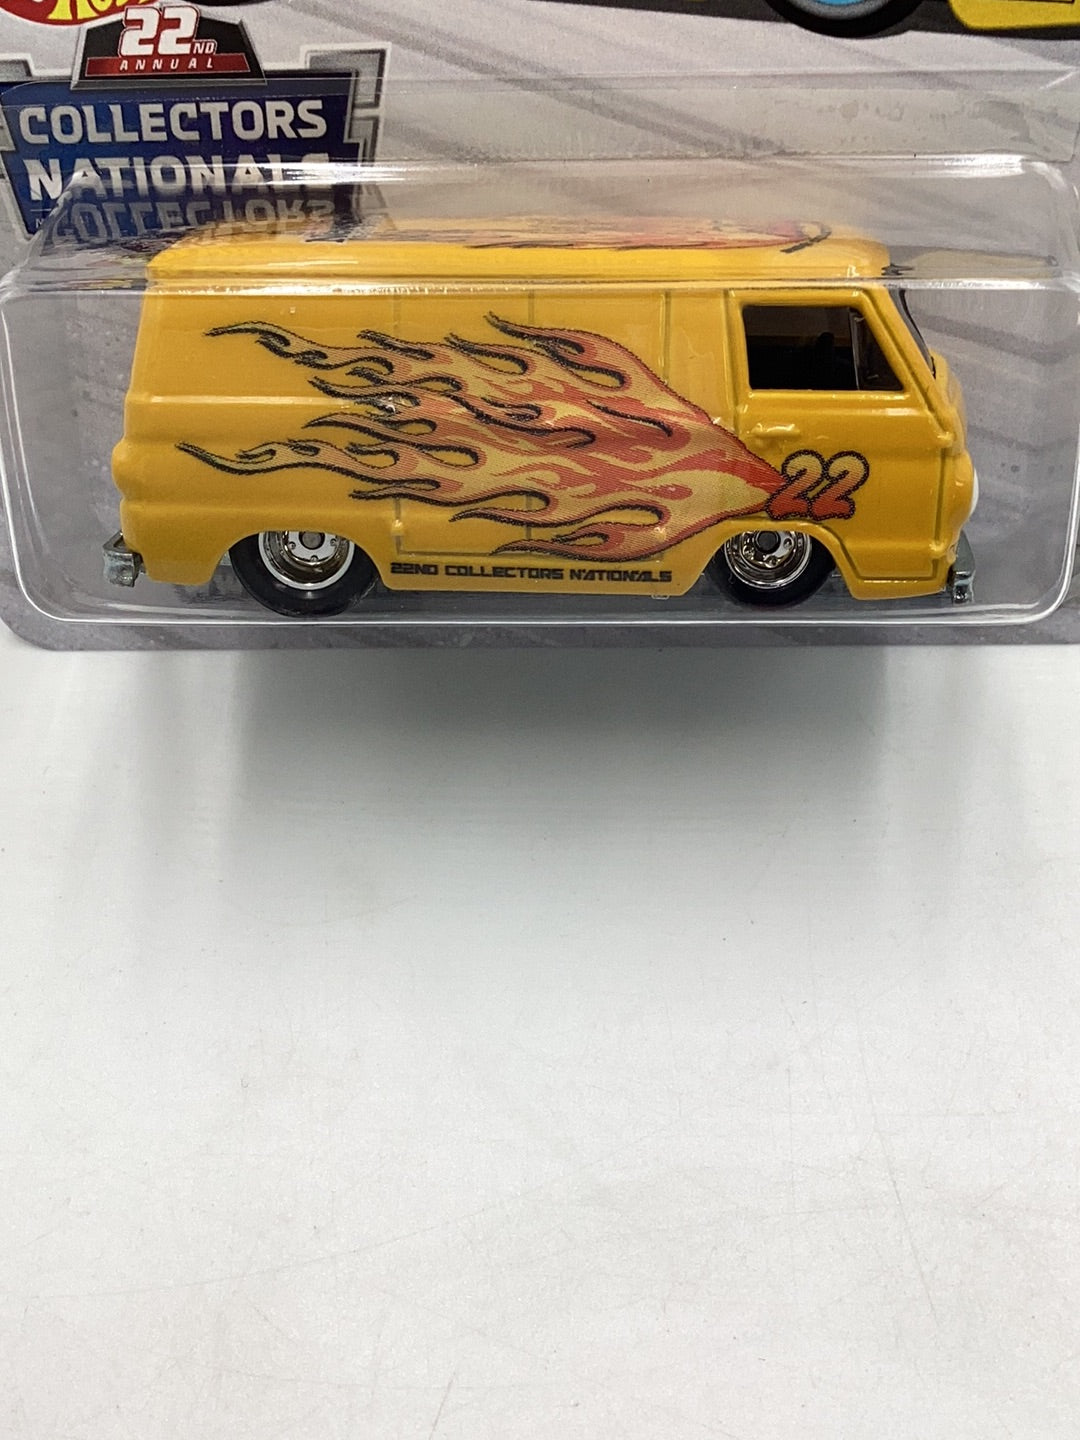 Hot wheels 22nd annual collectors Nationals newsletter car 66 Dodge A100 1 of 980 with sticker and protector